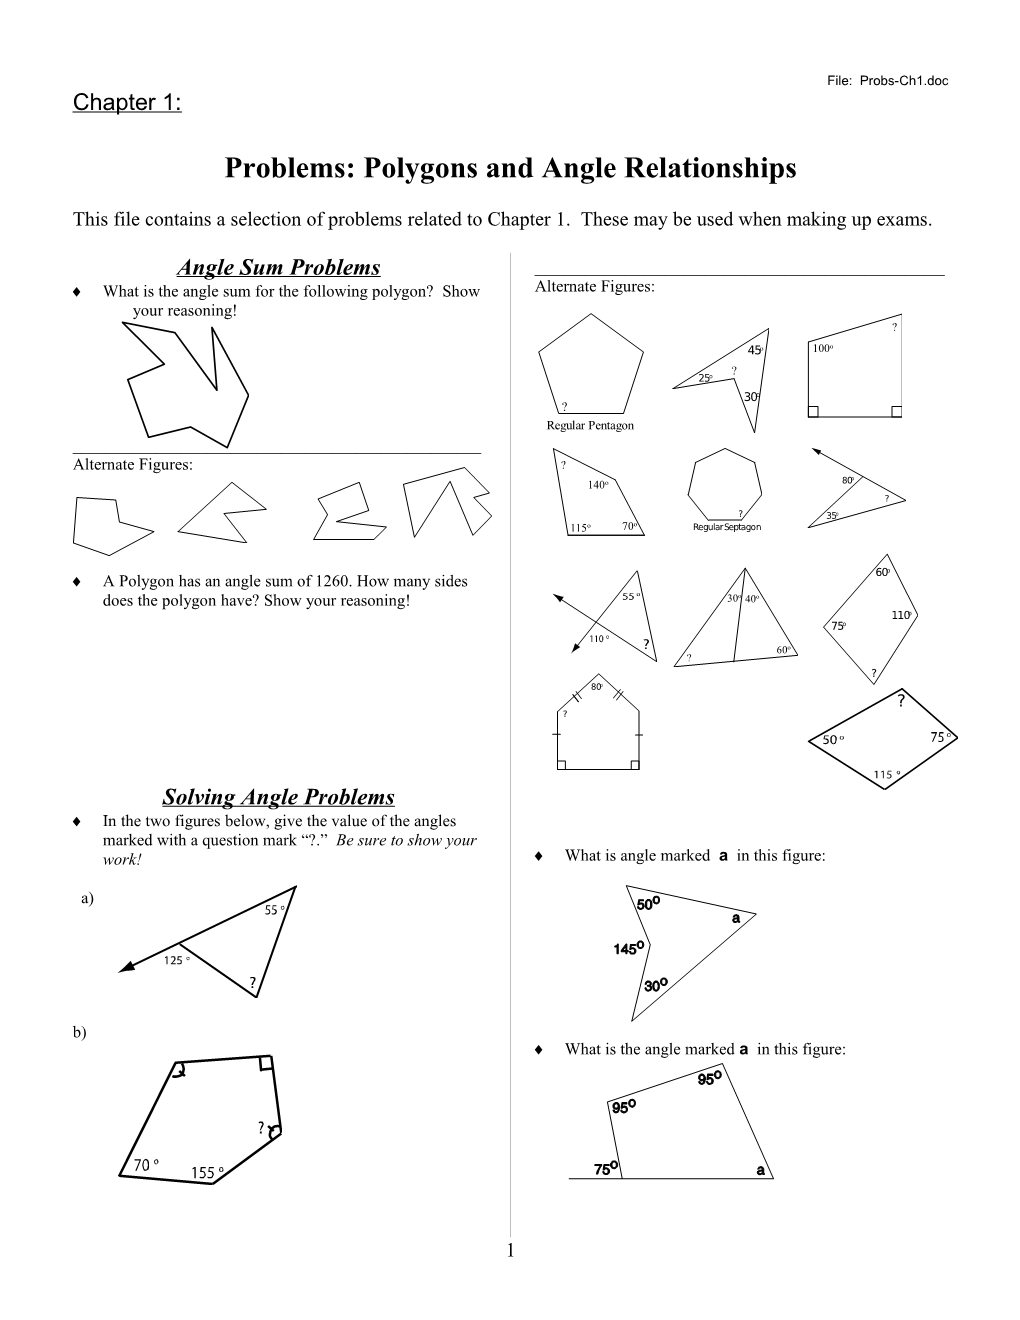 Problems:Polygons and Angle Relationships